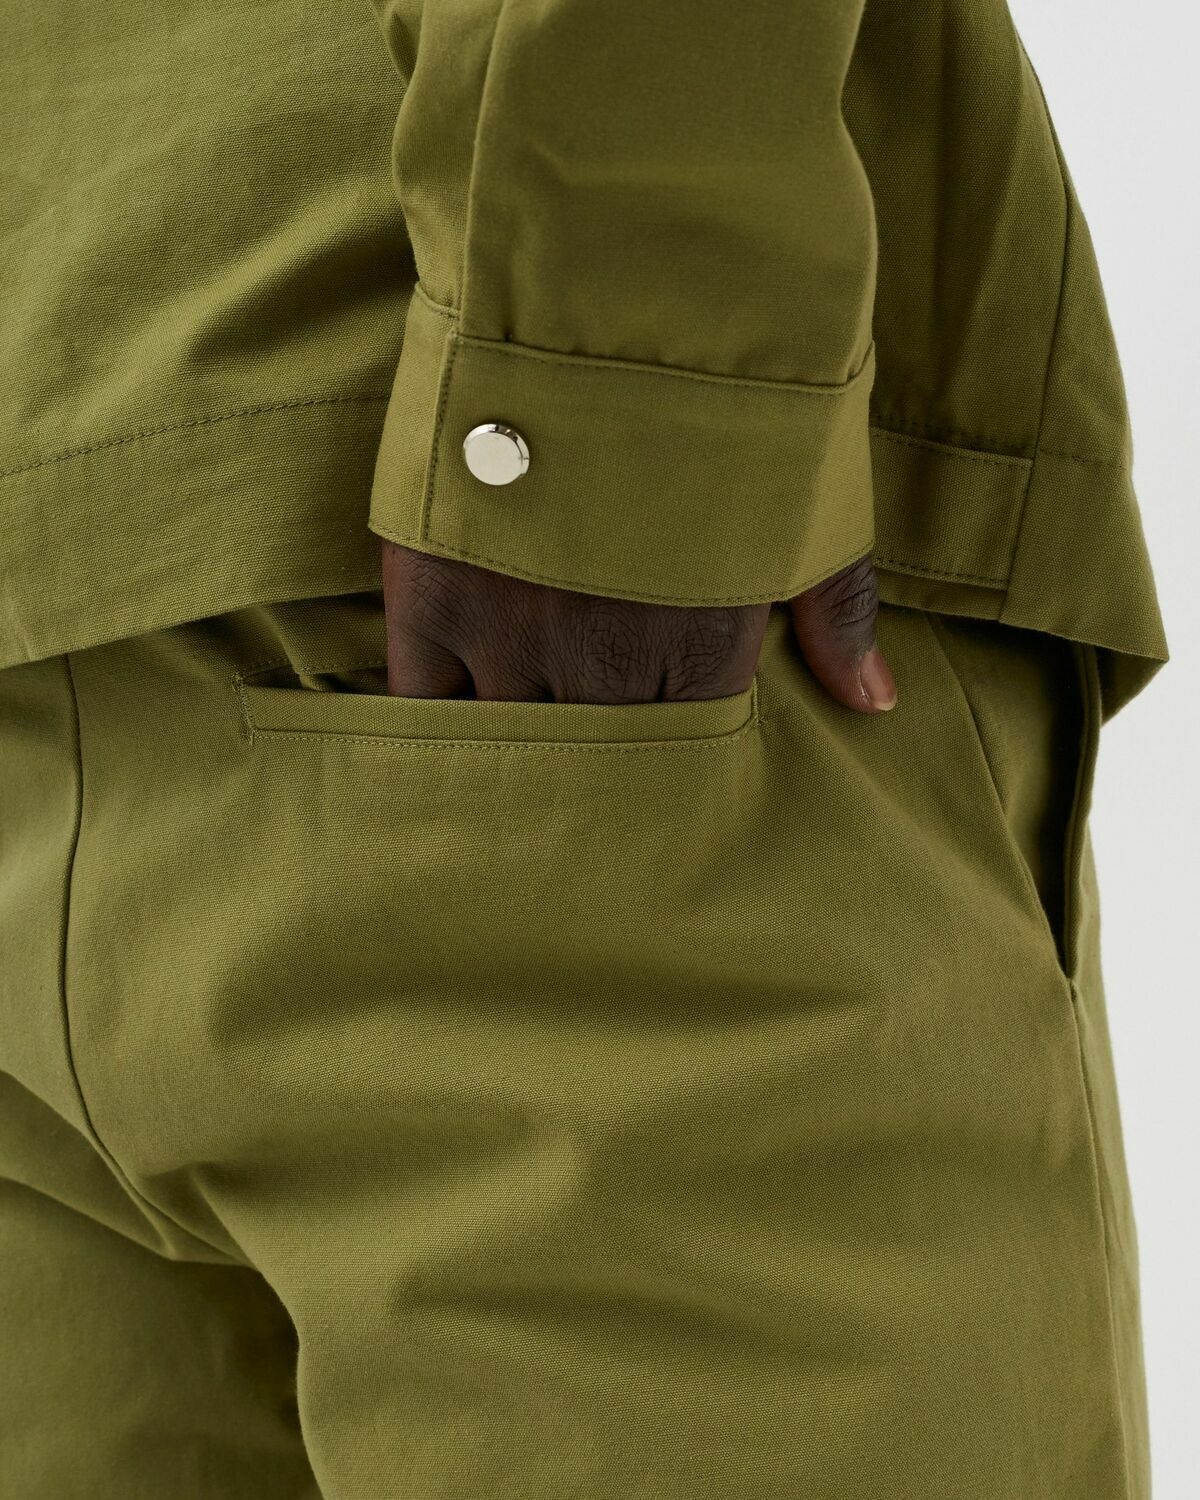 Bstn Brand Workwear Warm Up Pants Green - Mens - Casual Pants